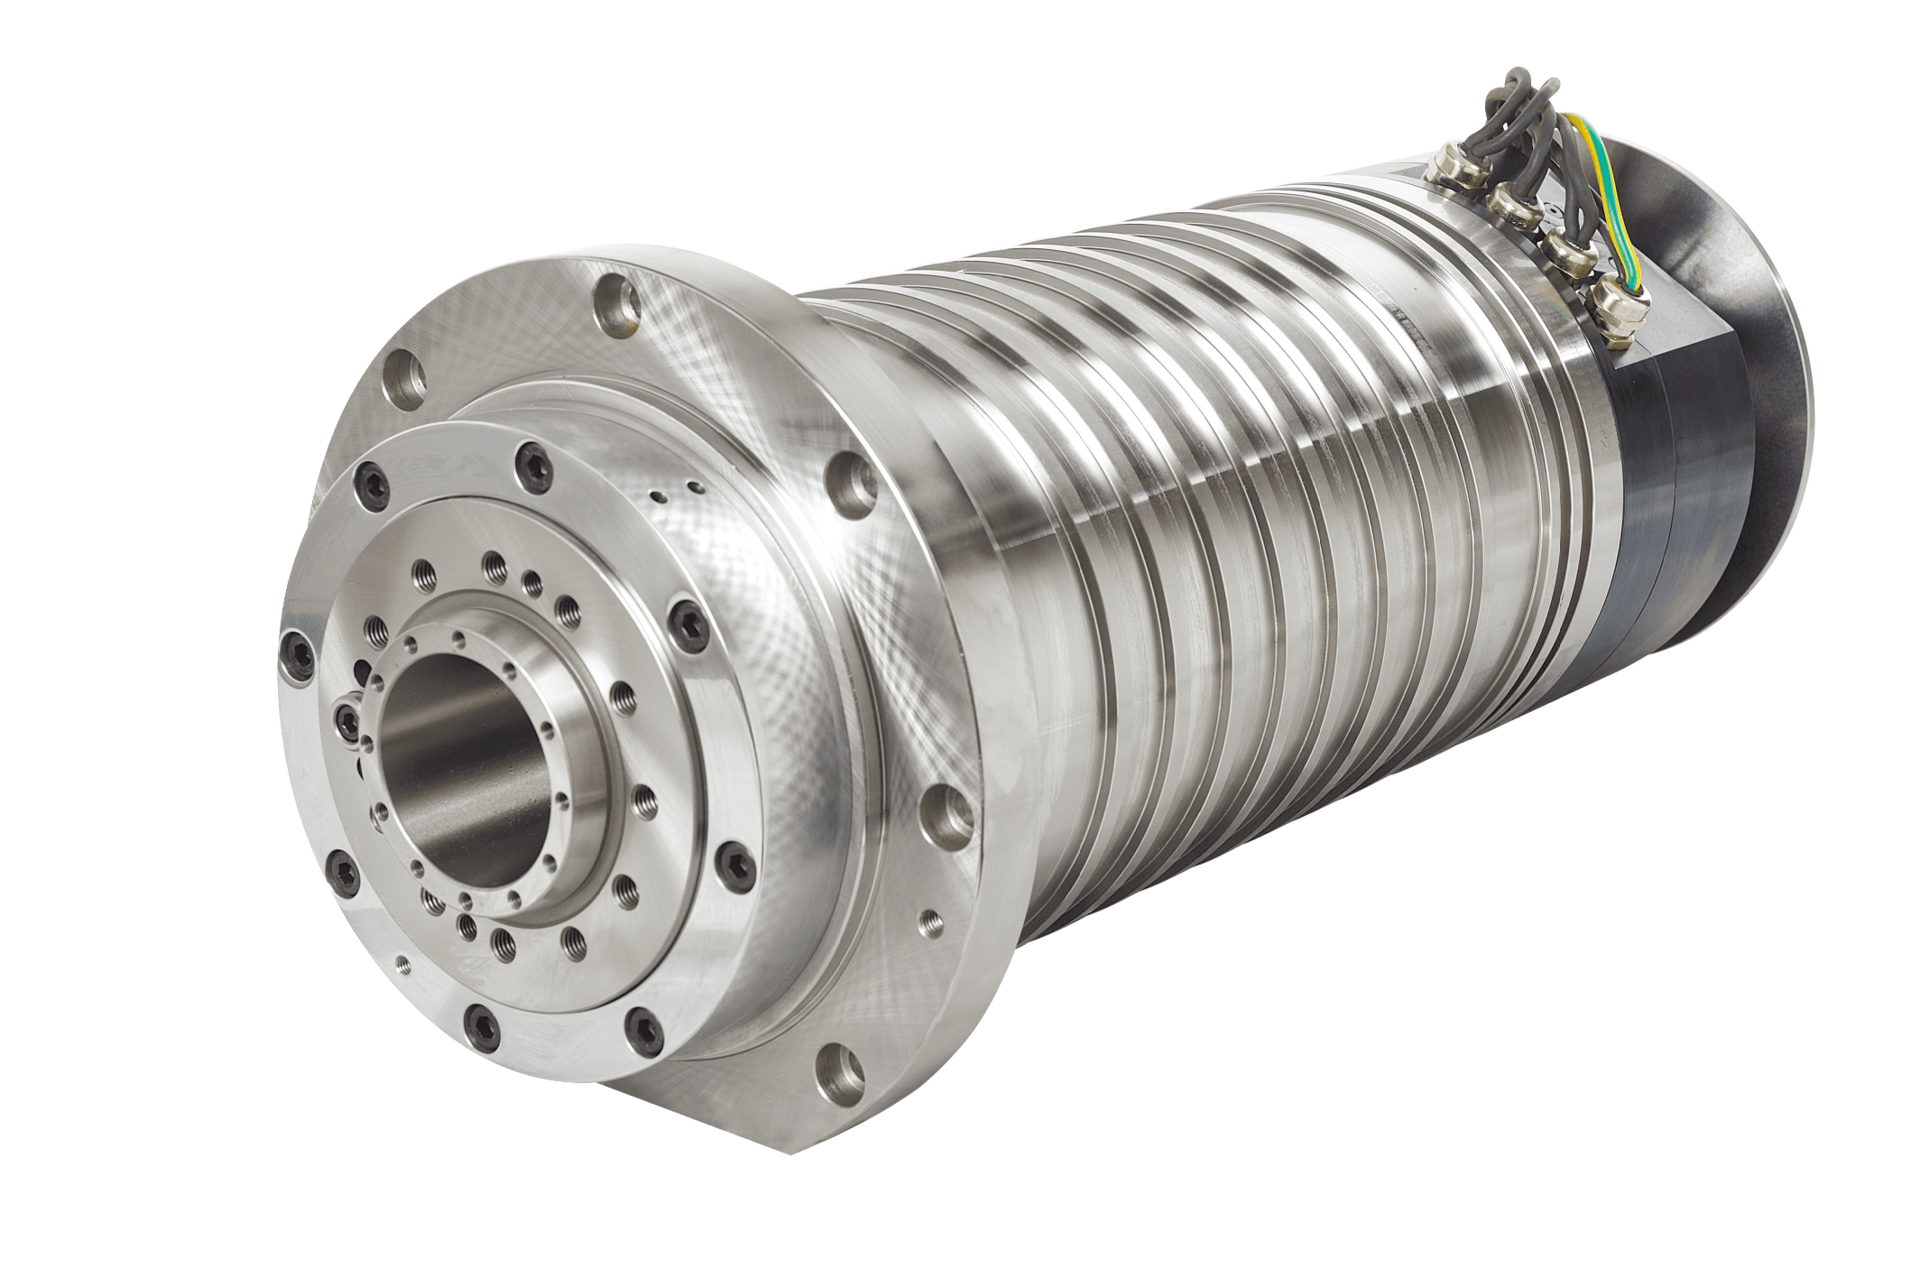 BENZ motor spindles: outstanding precision and productivity